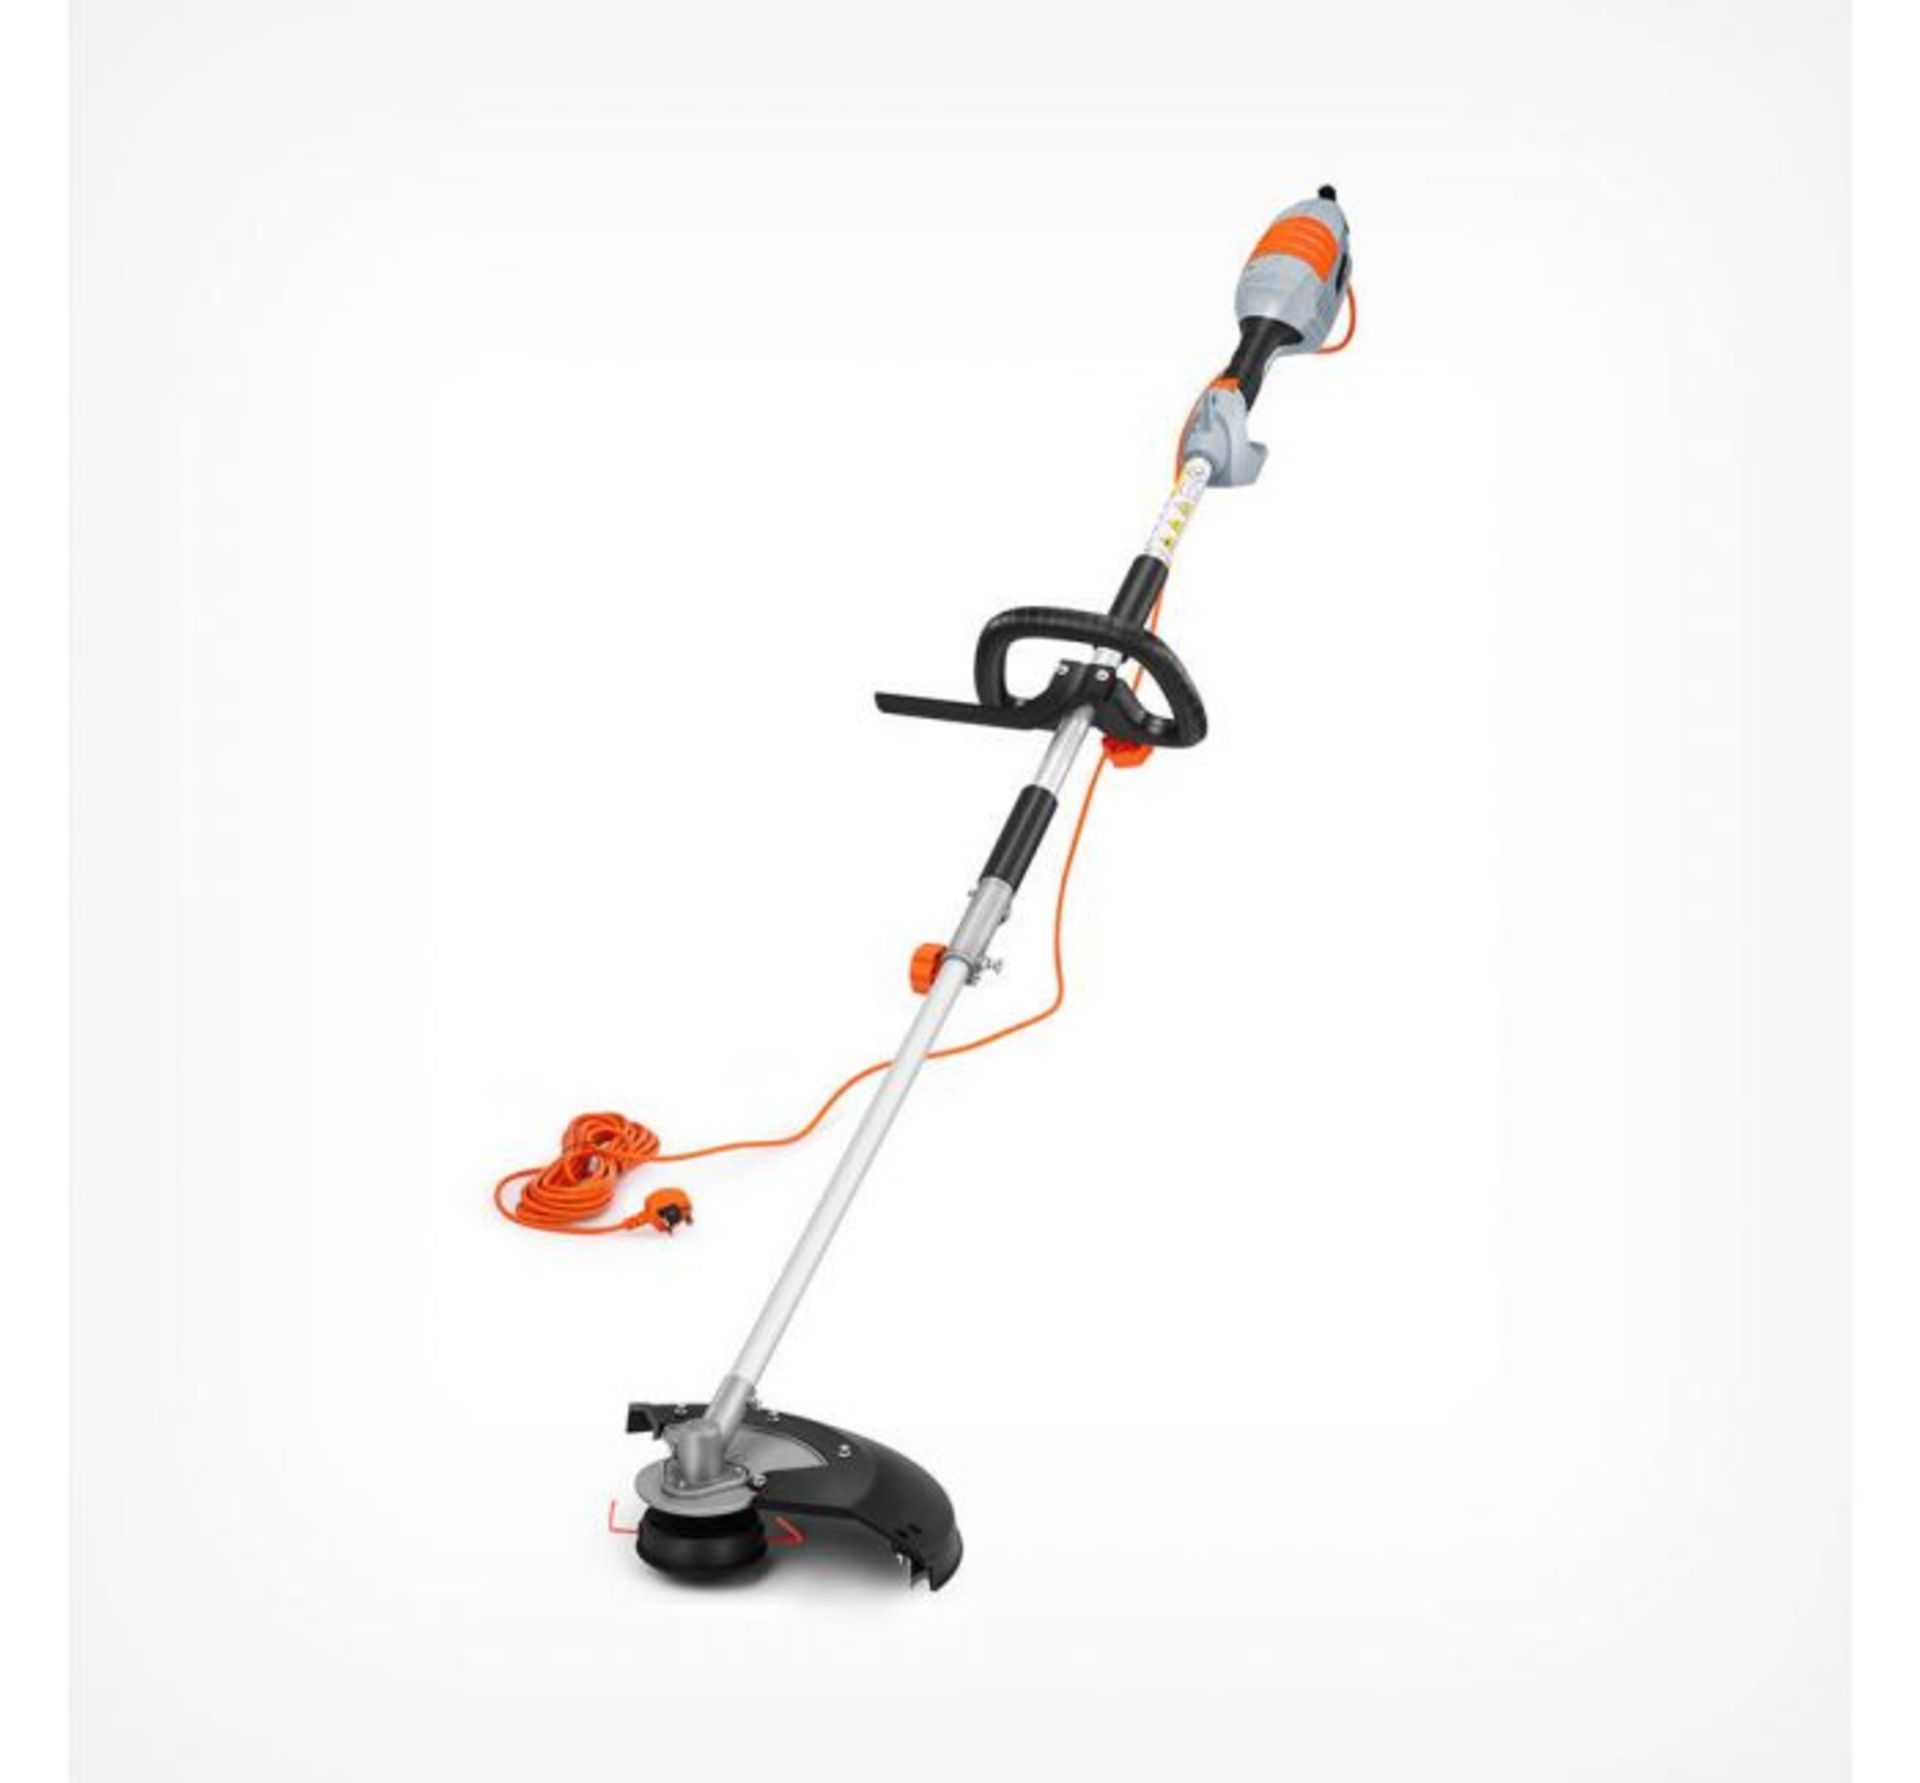 (DD107) Grass Trimmer & Brush Cutter 2-in-1 tool includes a grass trimmer for neatening edges ...